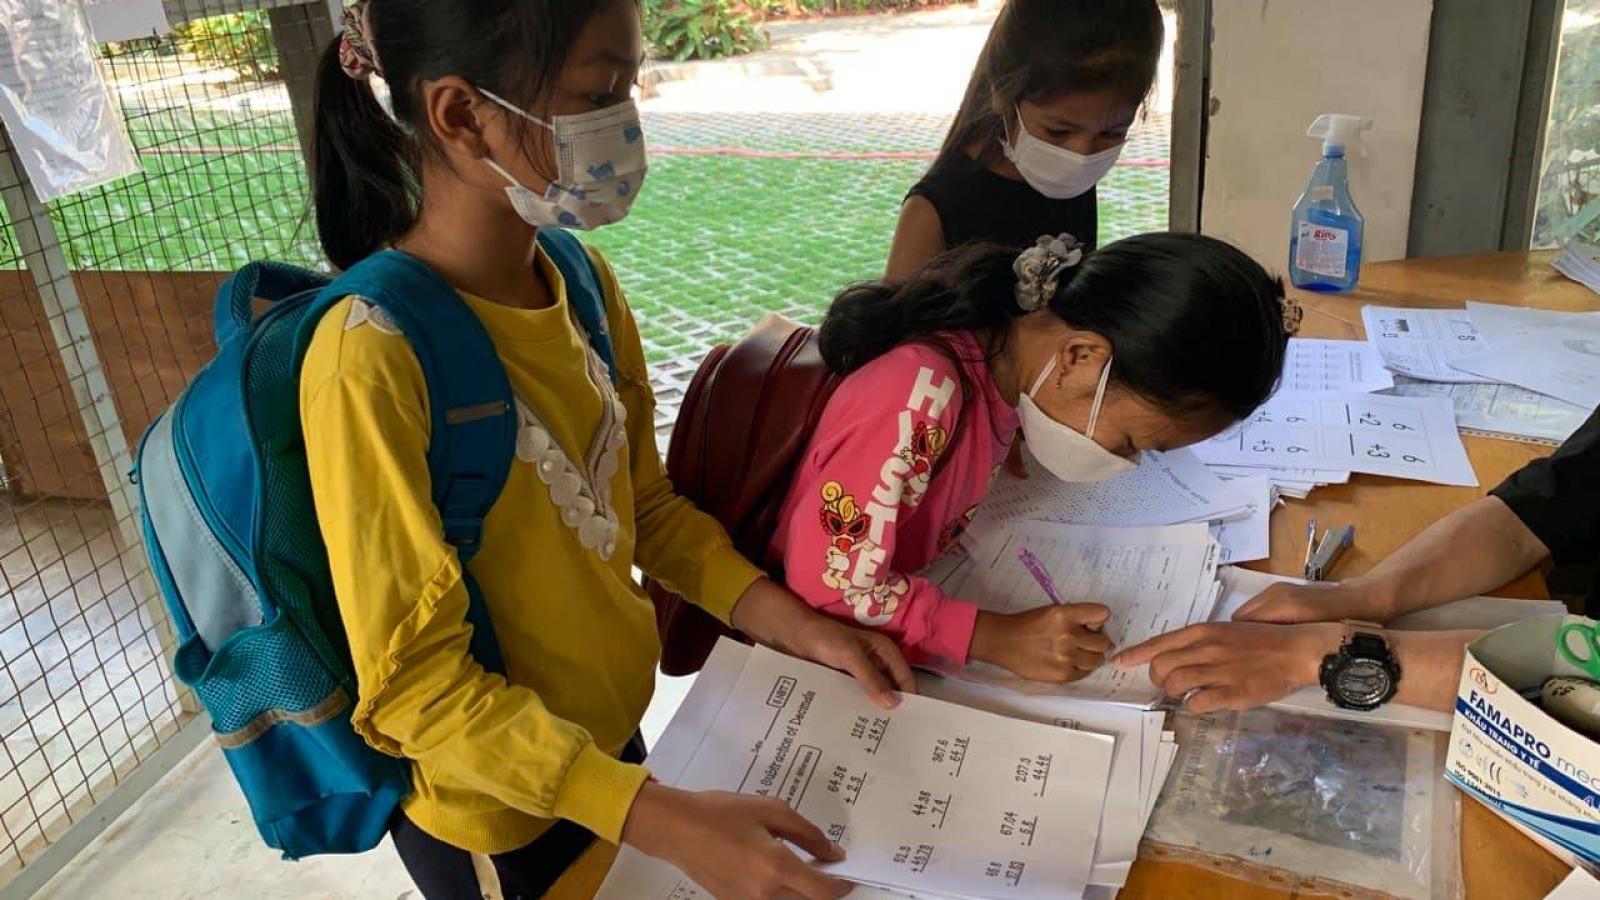 students receiving homework packets in Phnom Penh, Cambodia during the COVID-19 pandemic